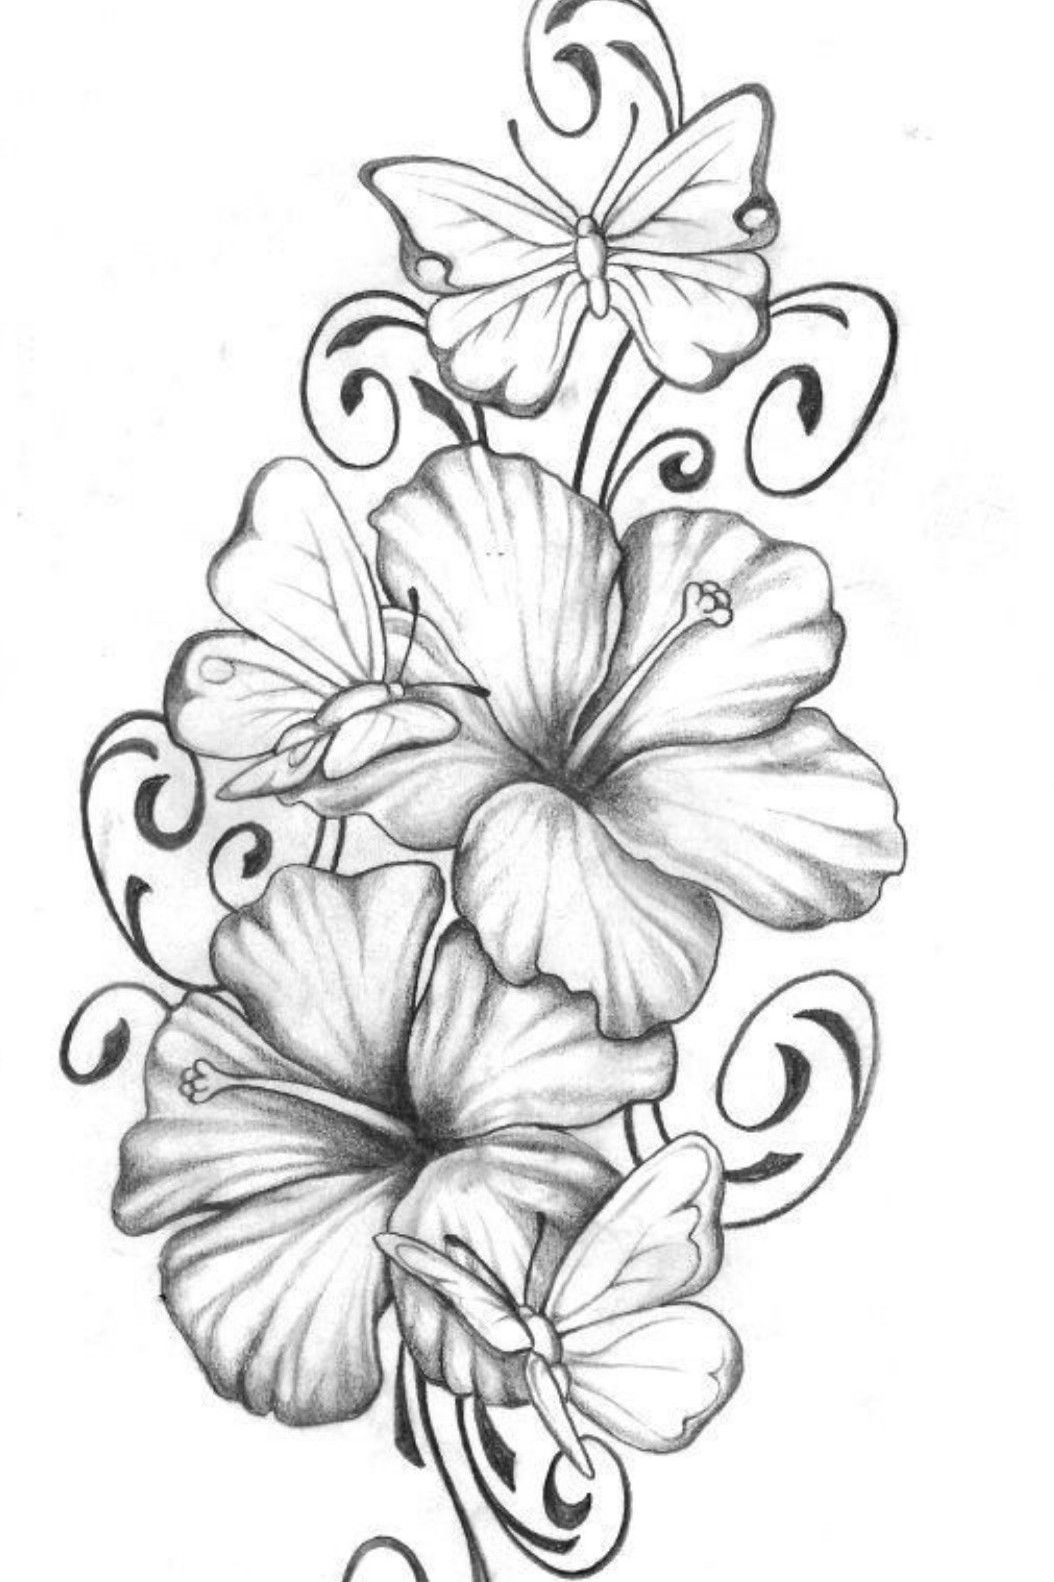 20 Best Hibiscus Tattoo Designs to Inspire You  Hibiscus tattoo Hibiscus  flower tattoos Tattoos for women